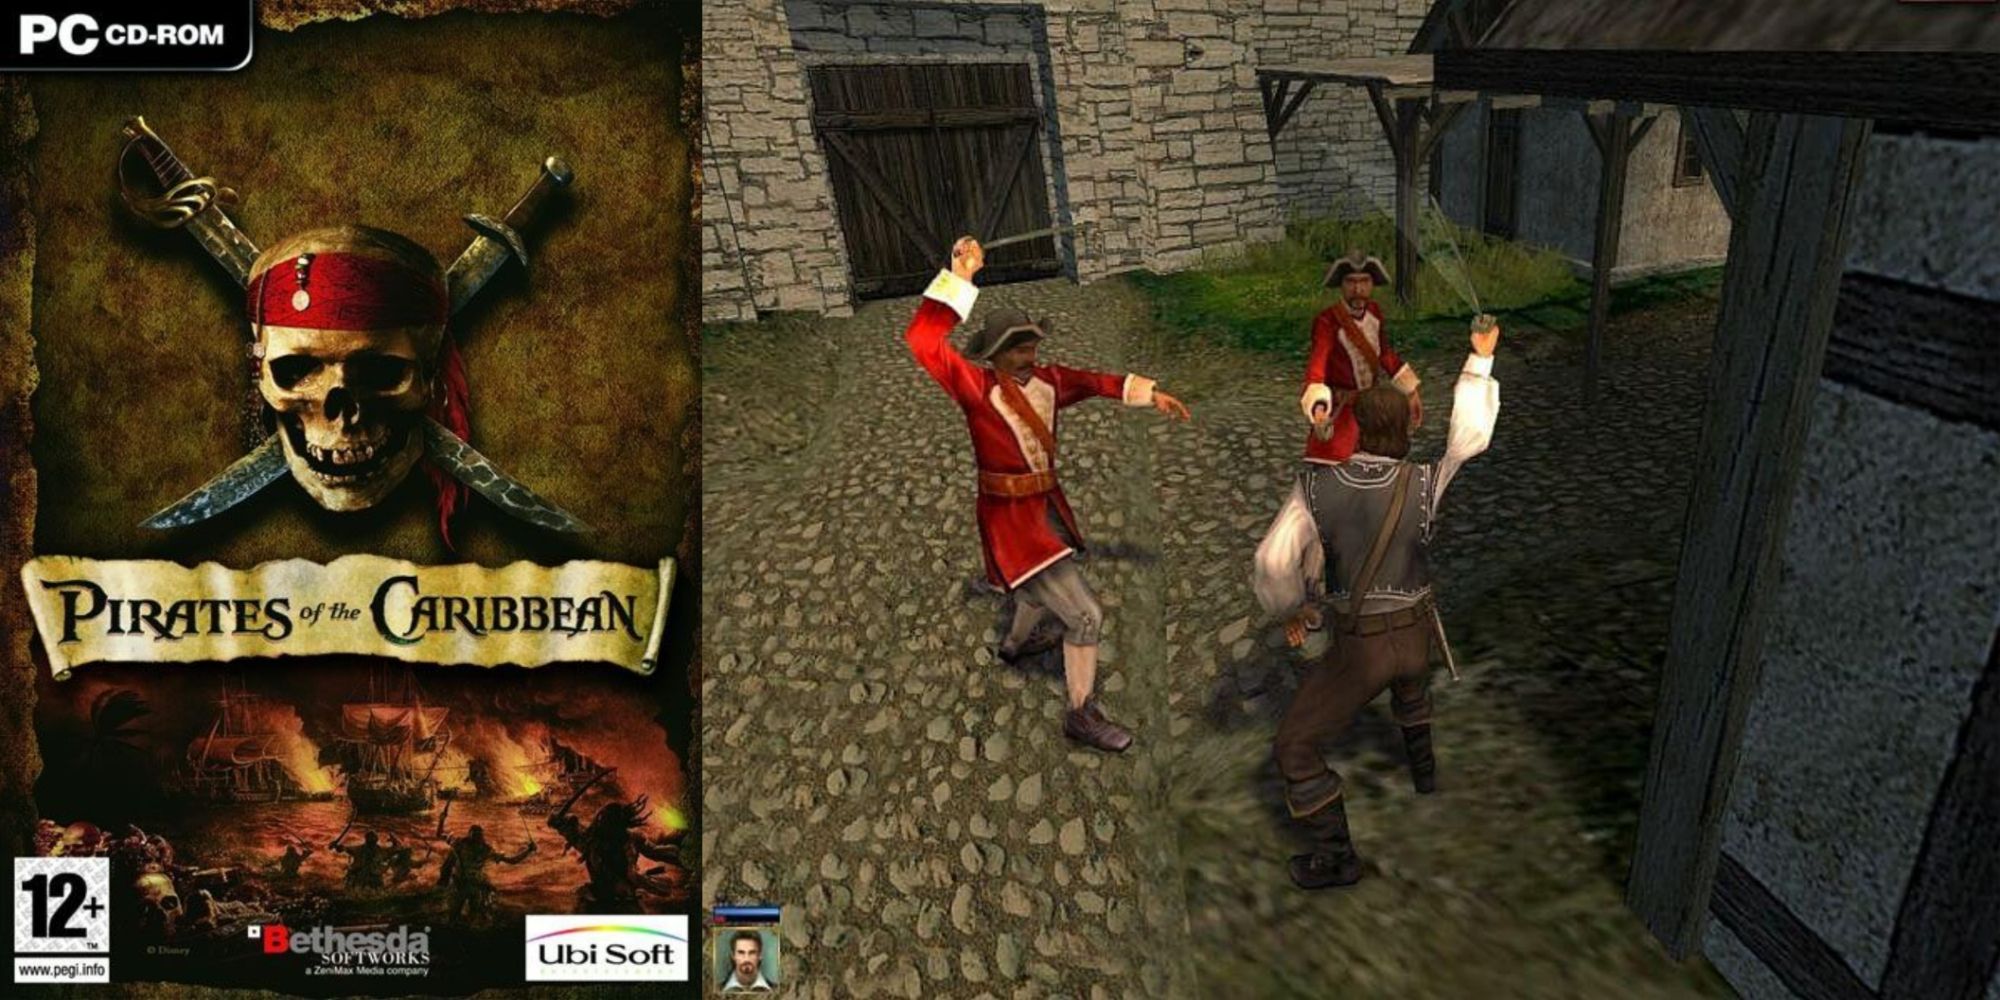 Pirates of the Caribbean 2003 video game cover and a screenshot of the game